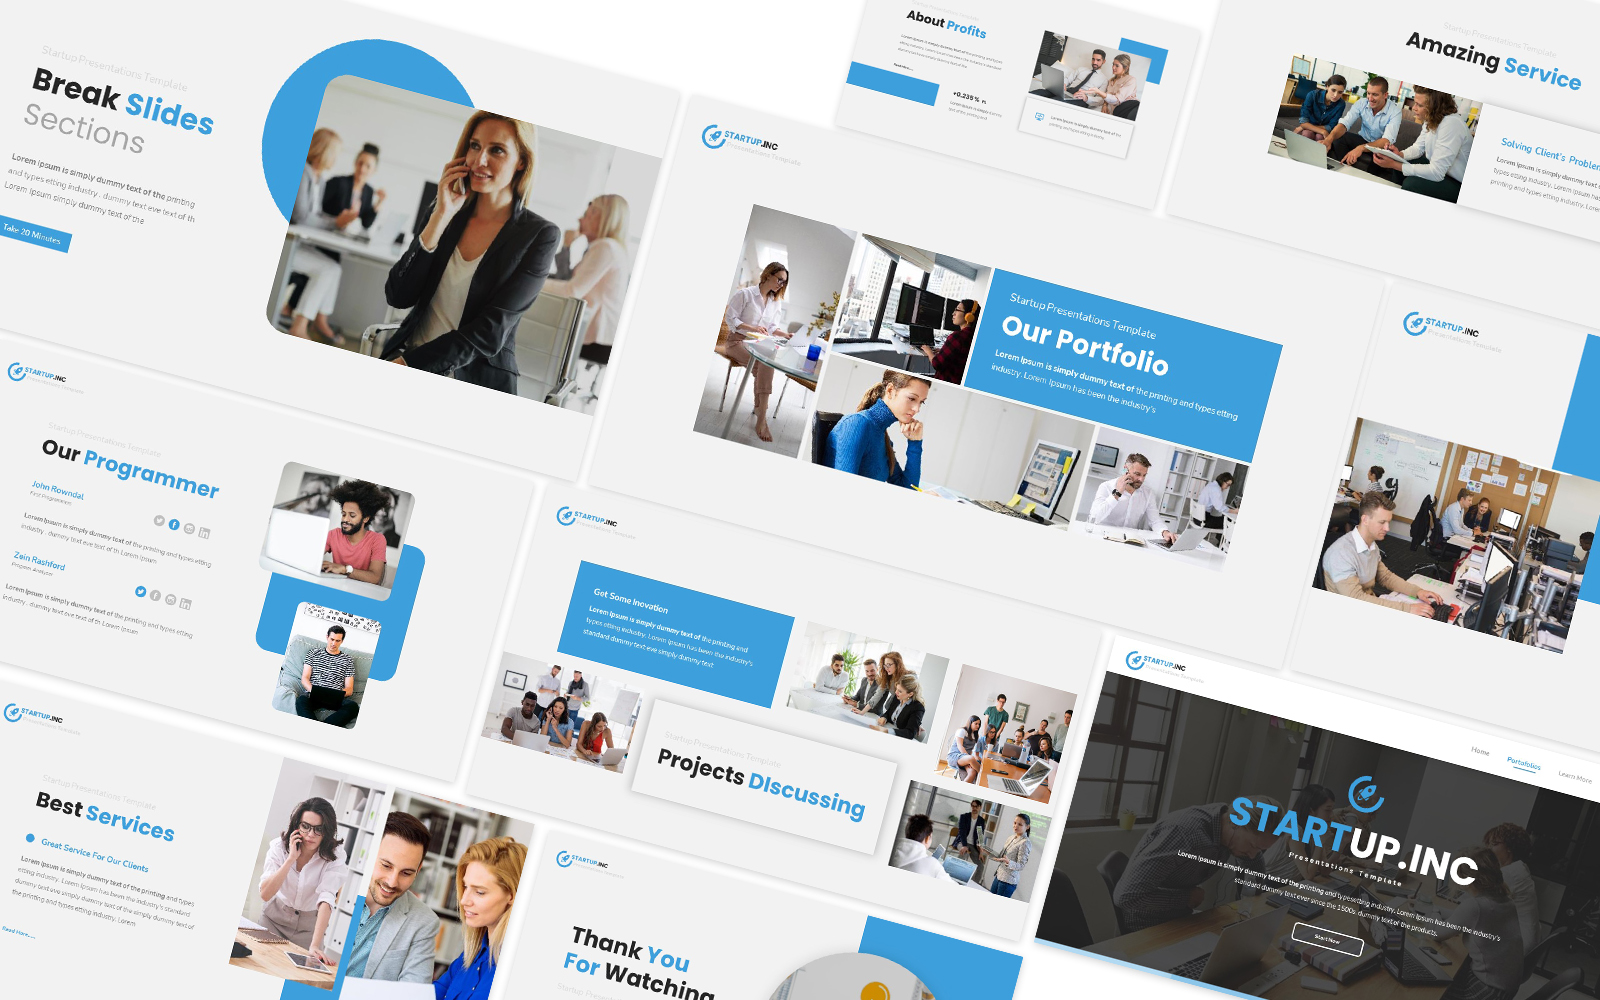 Startup.inc Powerpoint Template